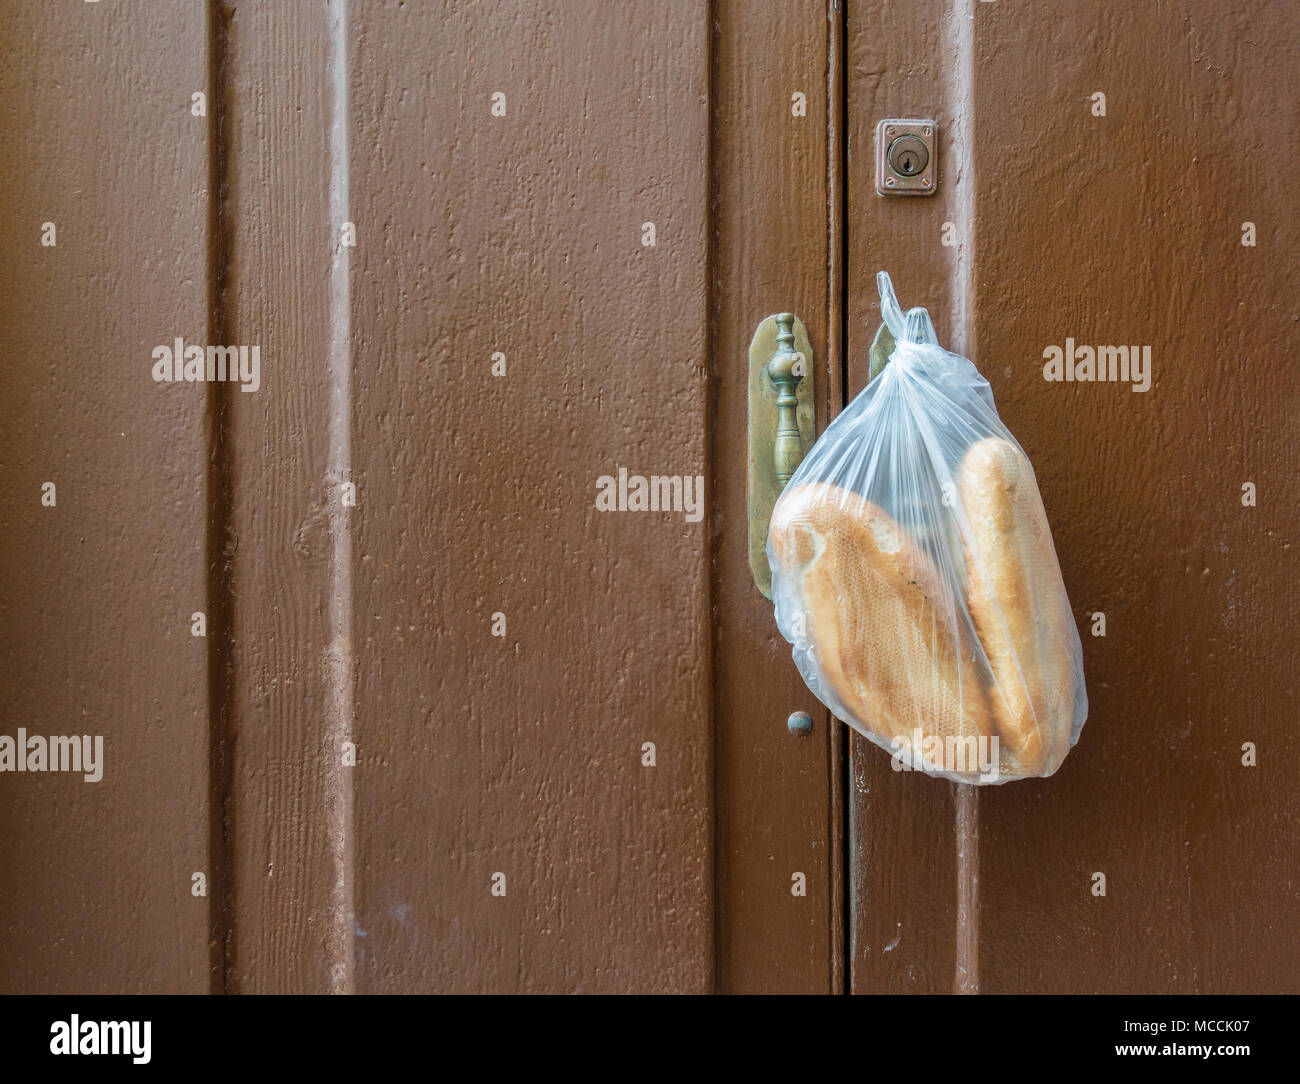 Bread hanging on door of house in village in Spain. A bread delivery van makes home deliveries in most Spanish villages. Stock Photo